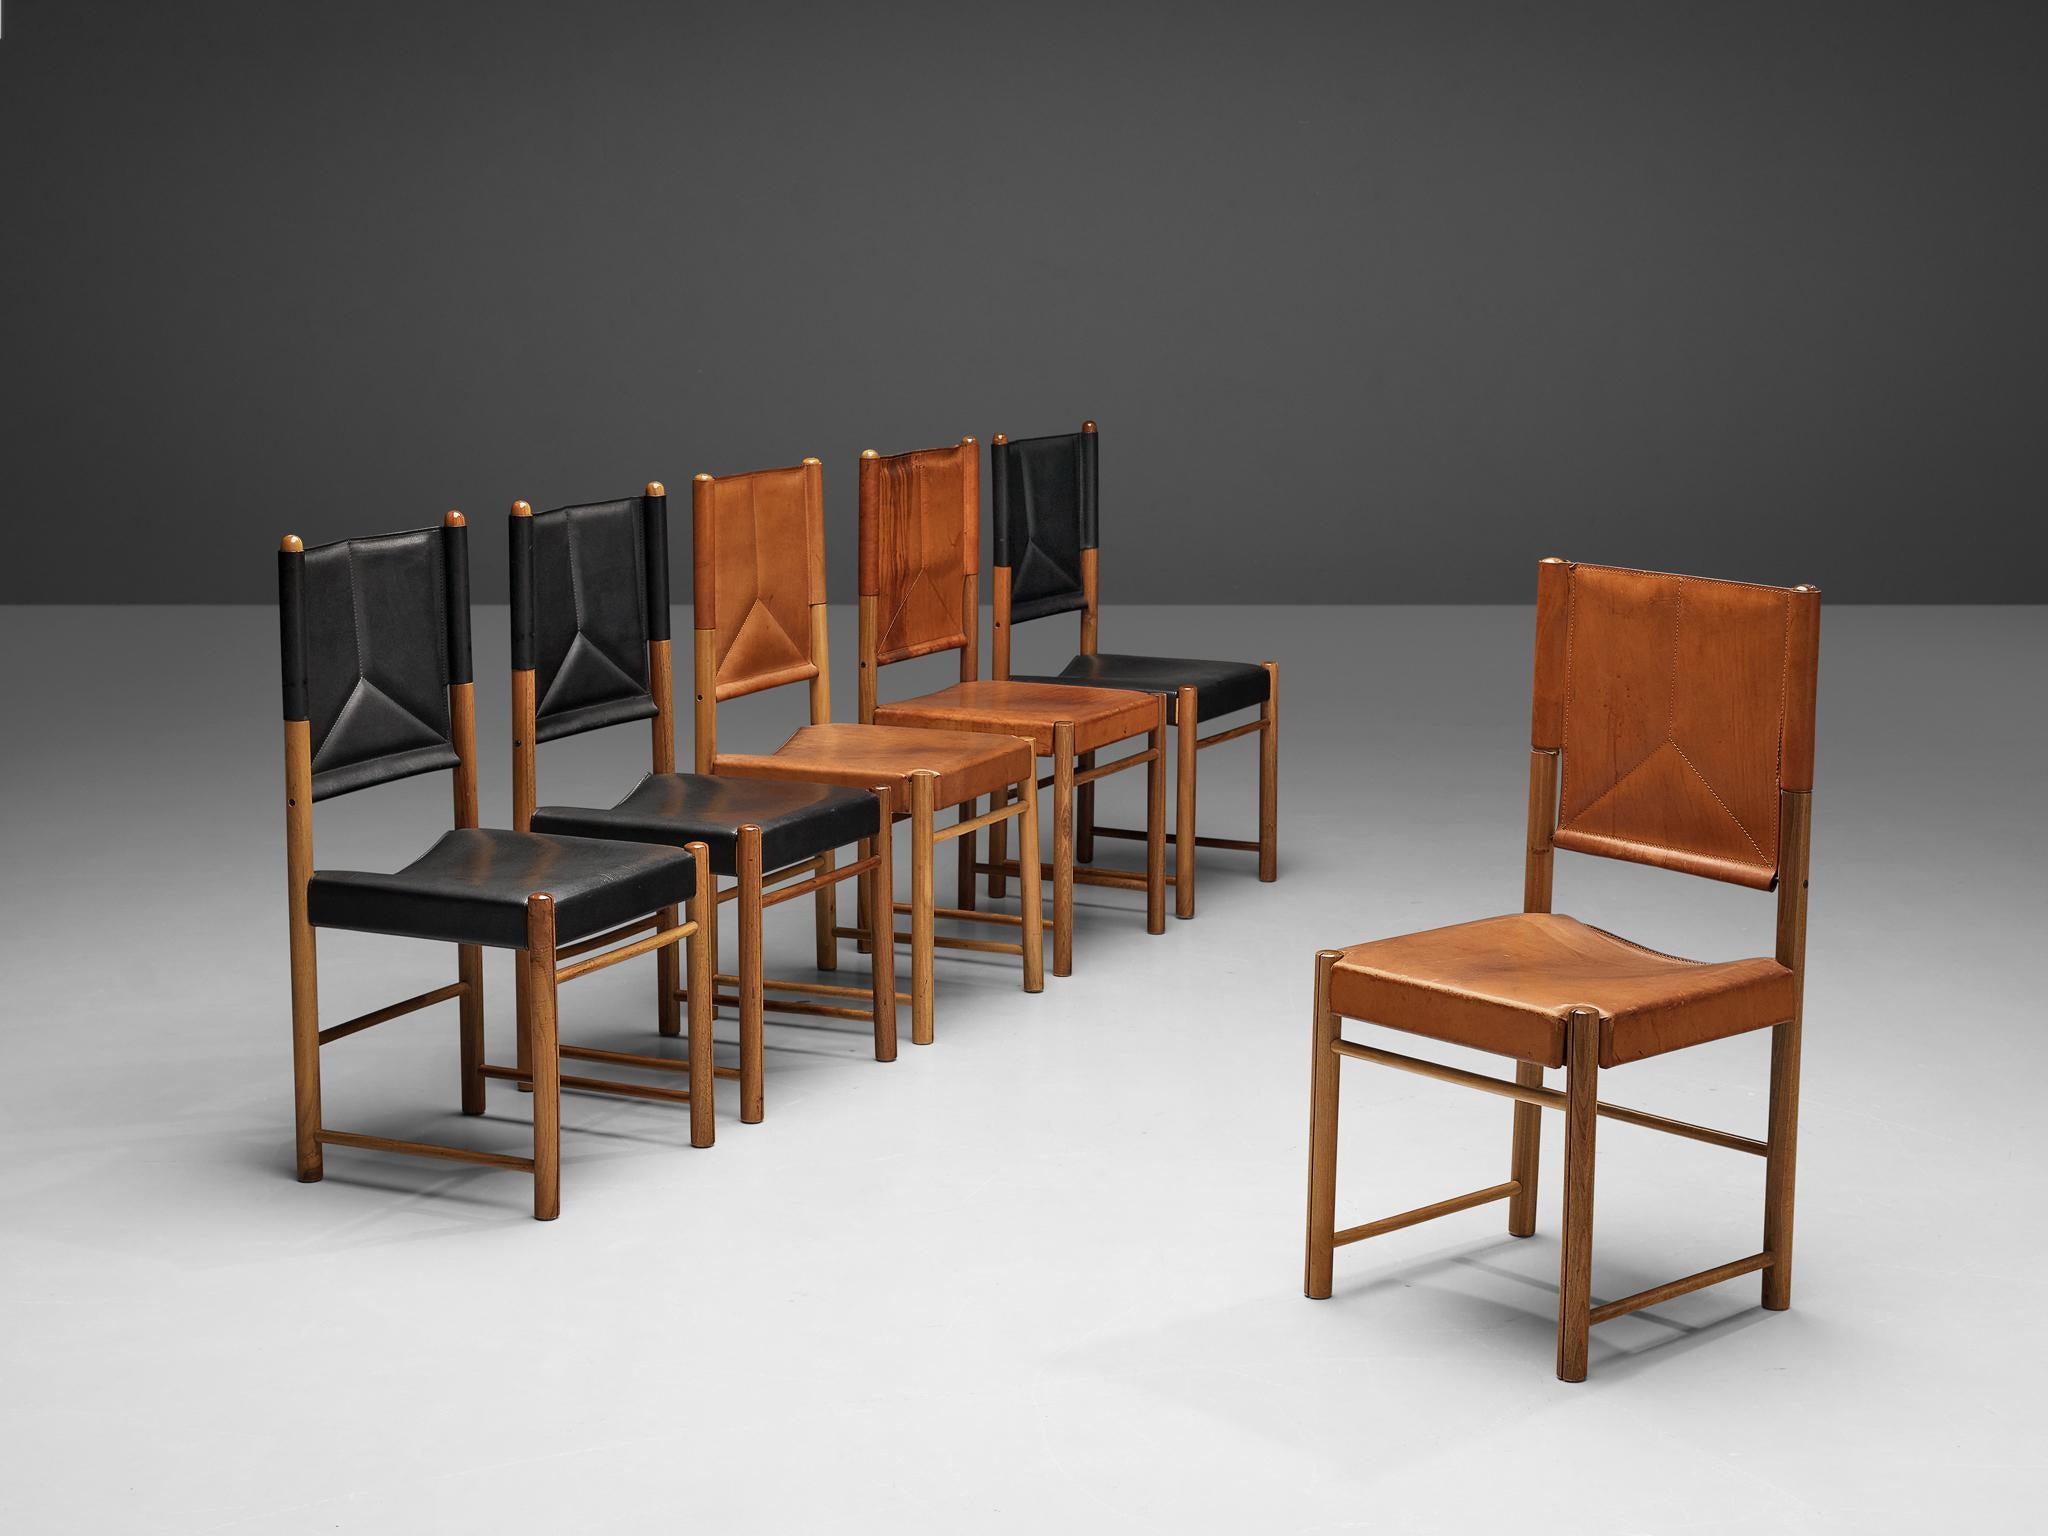 Set of dining chairs, leather, walnut, Italy, 1980s

This striking set of dining chairs surprises with a color range from black to cognac. Together the leather seats and backrests form an admirable set. The curved seat and the backrest with